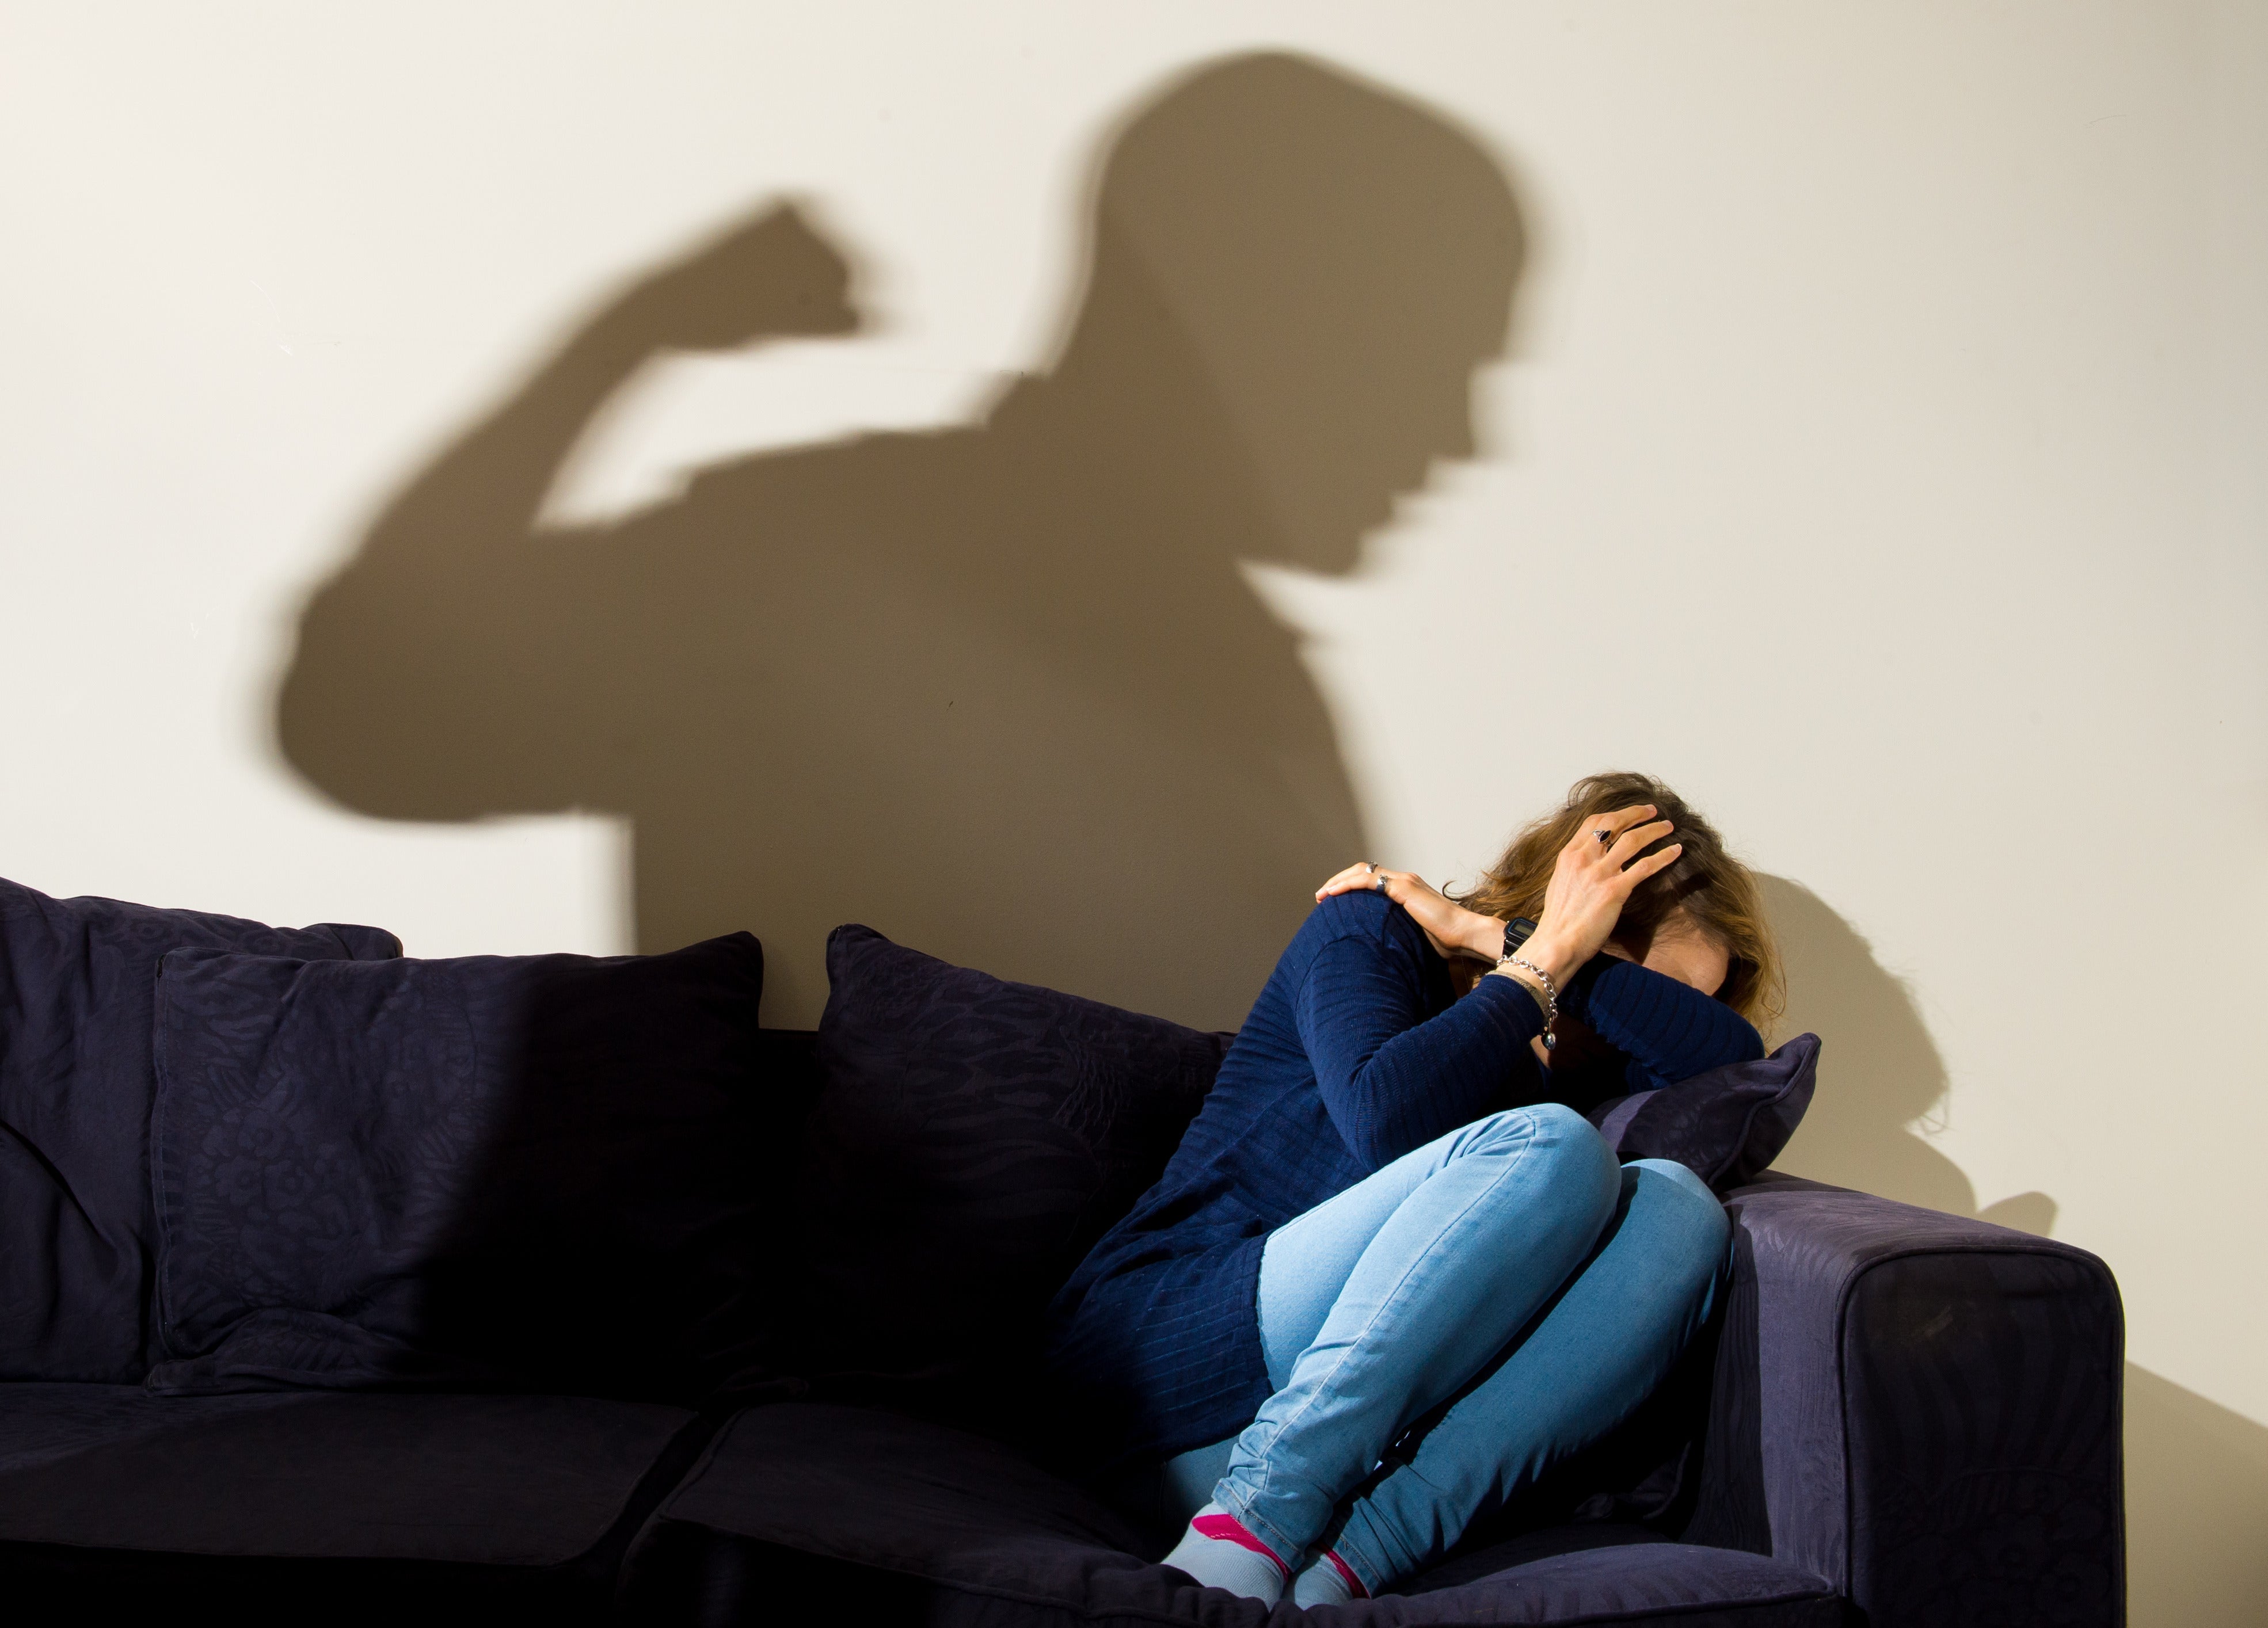 Over a quarter of those polled were found to have been in a relationship where they deemed themselves to be subjected to coercive control